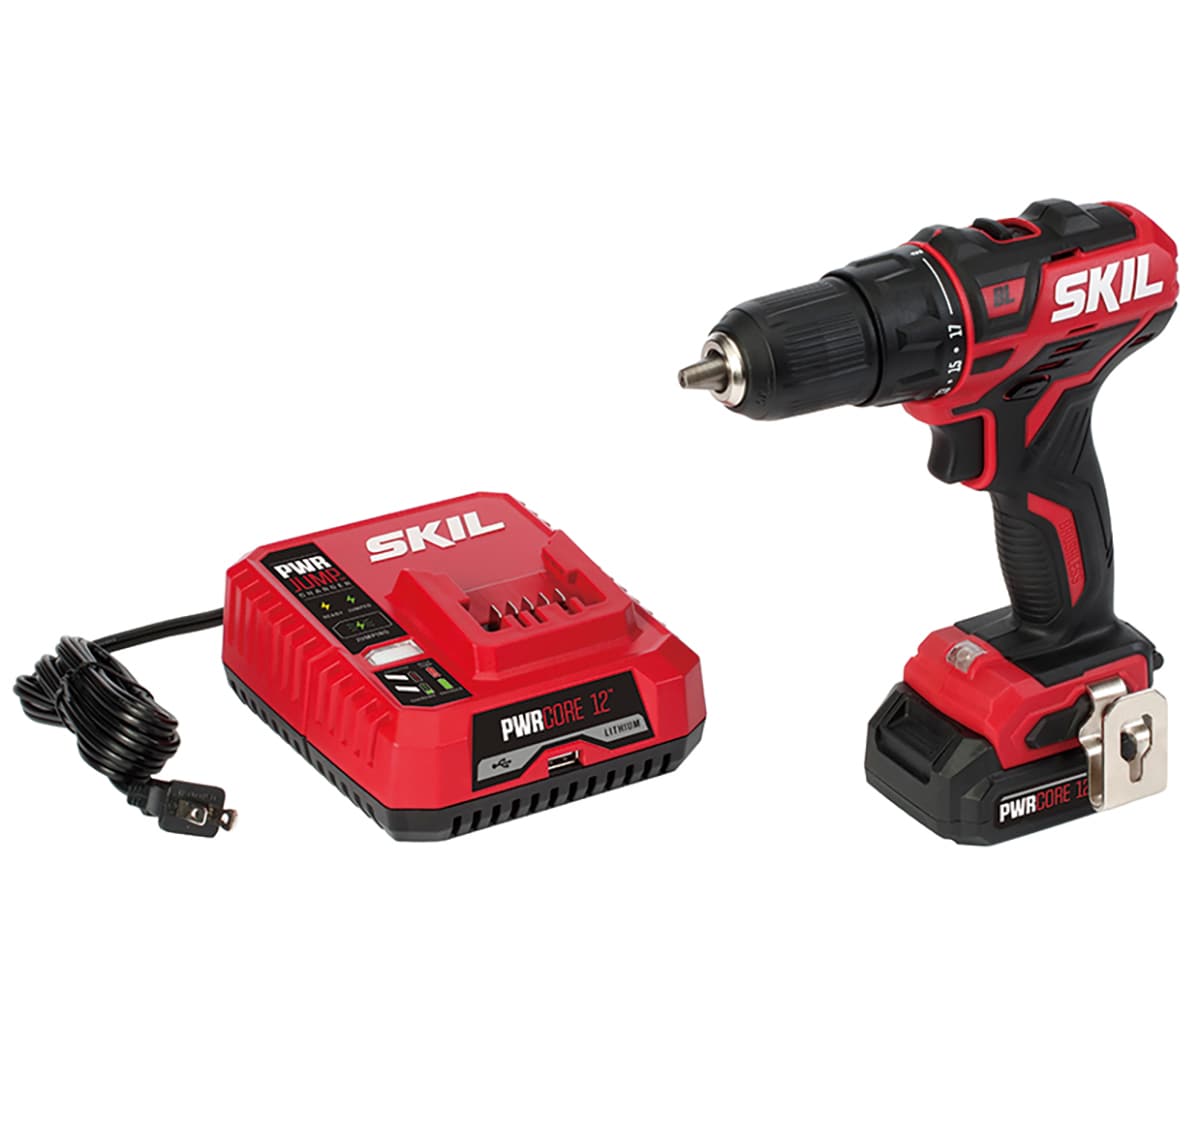 PWR CORE 12-volt 1/2-in Brushless Cordless Drill (1-Battery Included, Charger Included) | - SKIL DL529002